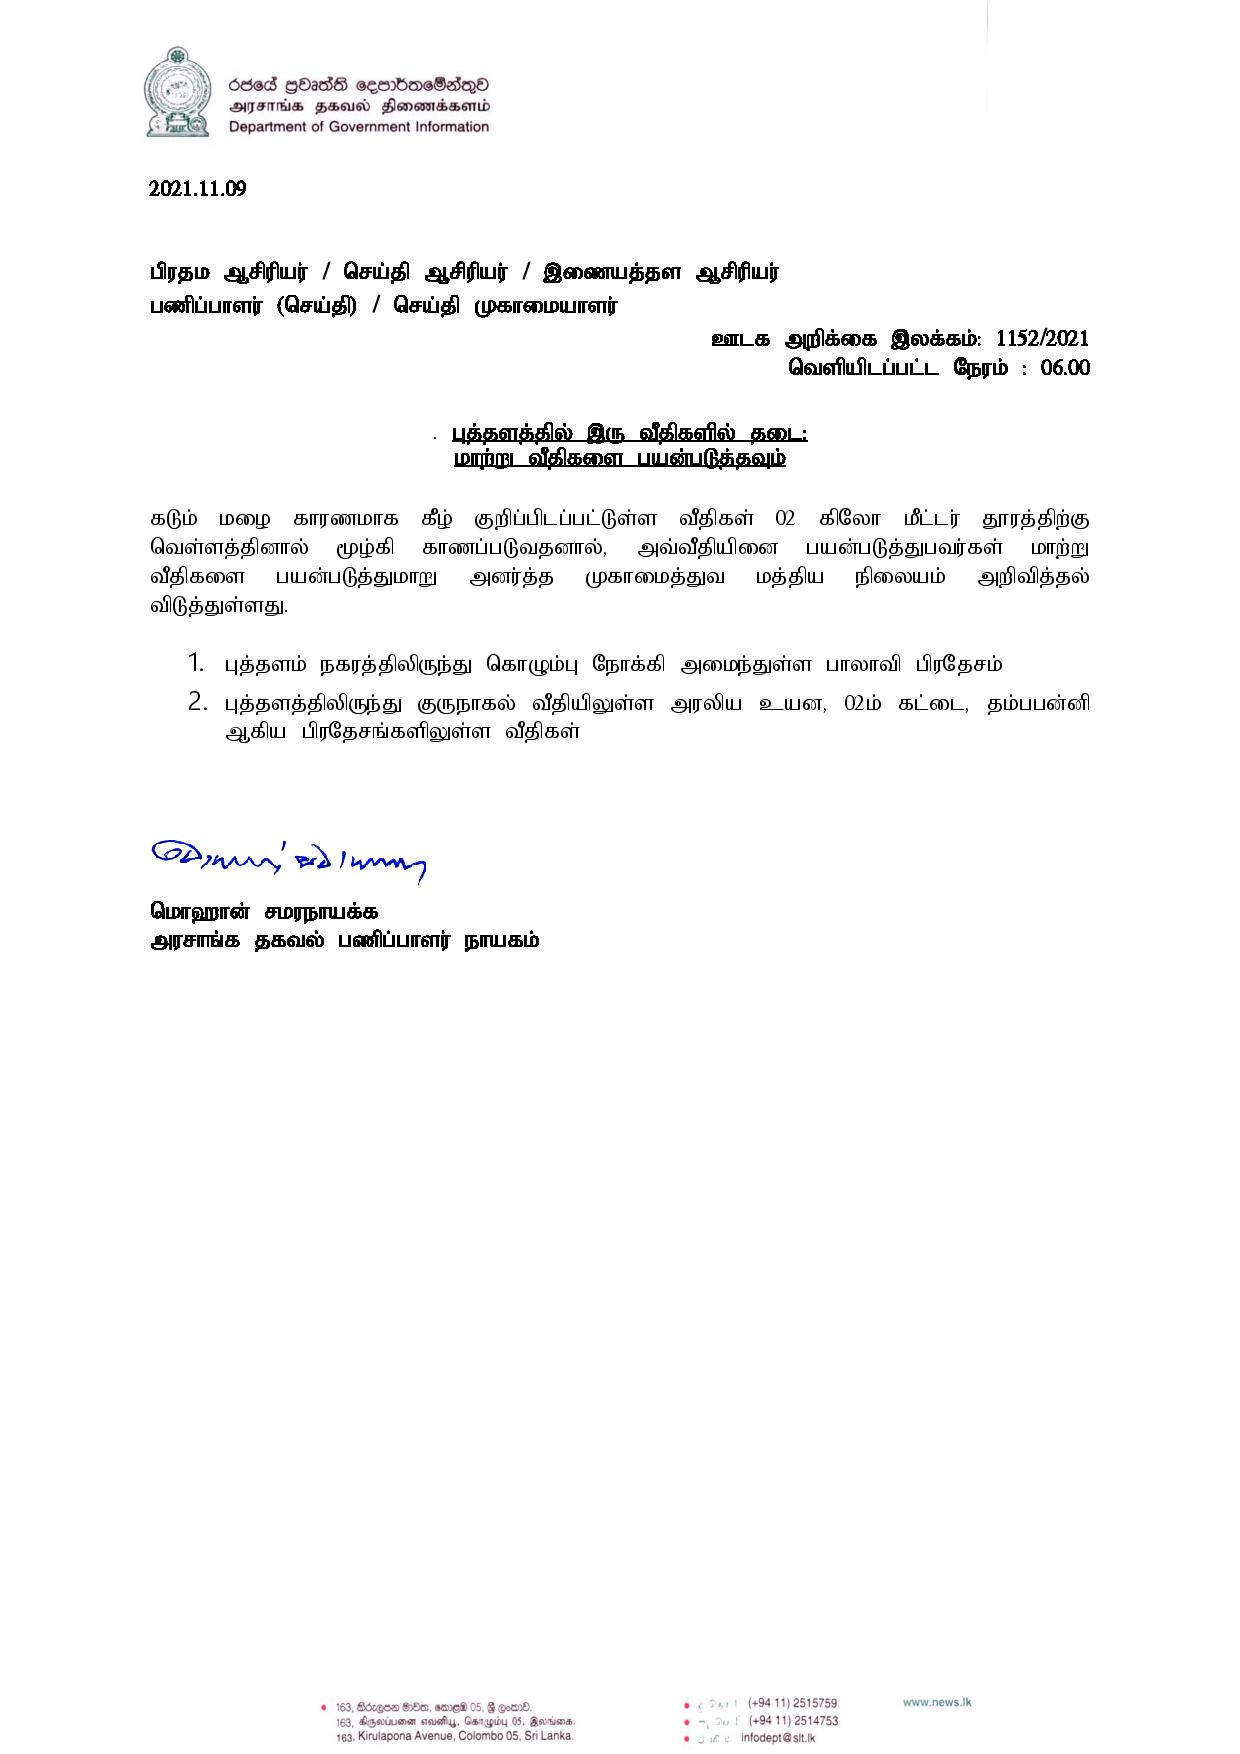 Press Release 1152 Tamil 1 page 001